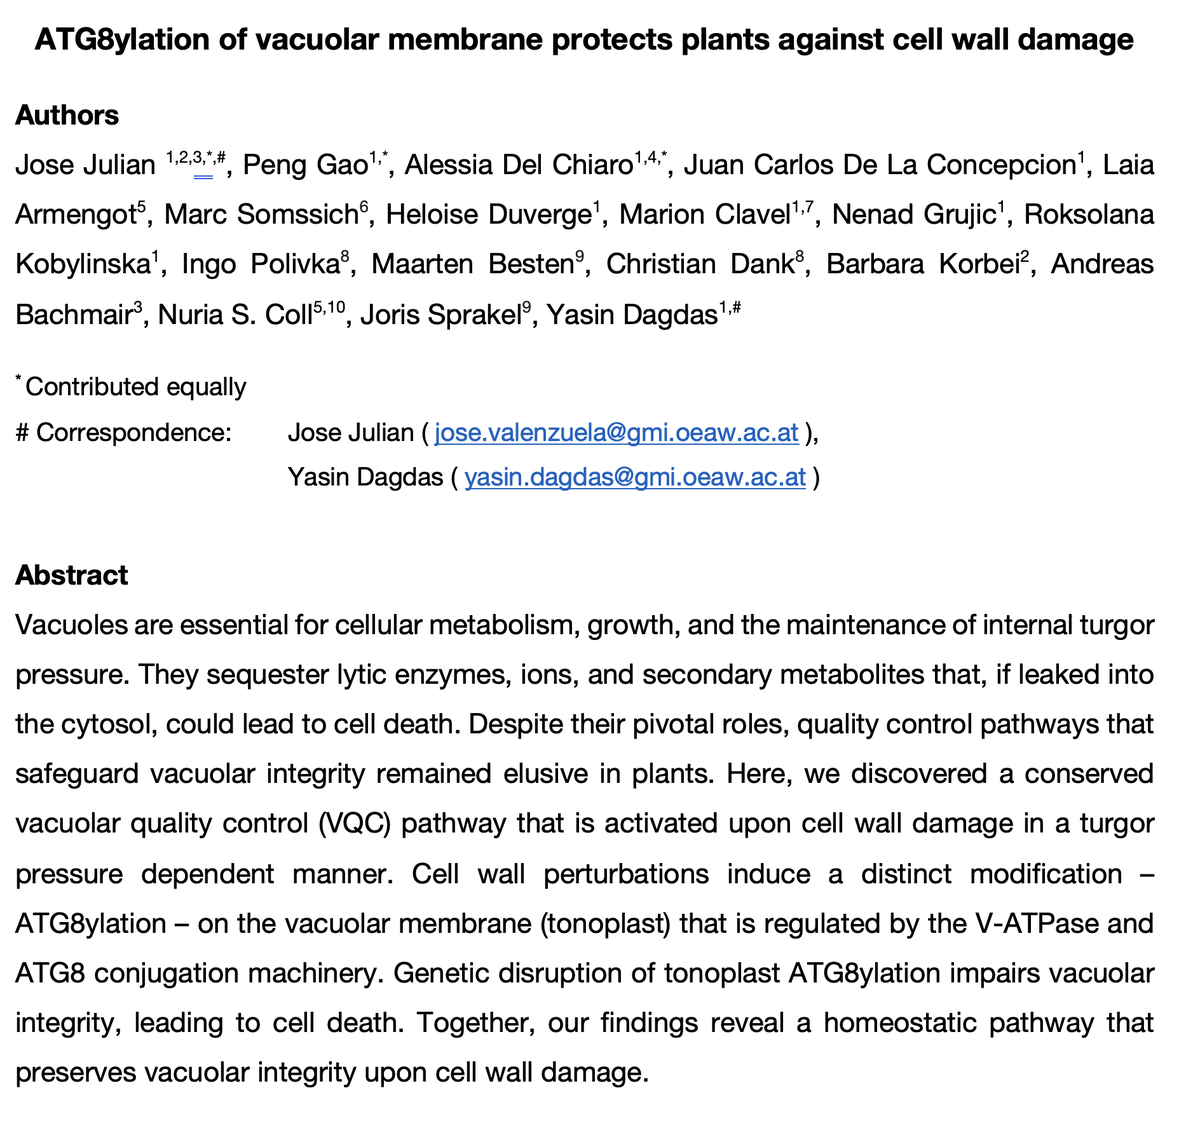 📢NEW #Preprint, Brainchild of @J_ATPase with Alessia, Peng & our amazing collaborators. Topics covered #ATG8ylation, #cell_wall_damage, #vacuolar_quality_control, #mechanostasis. biorxiv.org/content/10.110… Intrigued? See the 🧵for a summary: